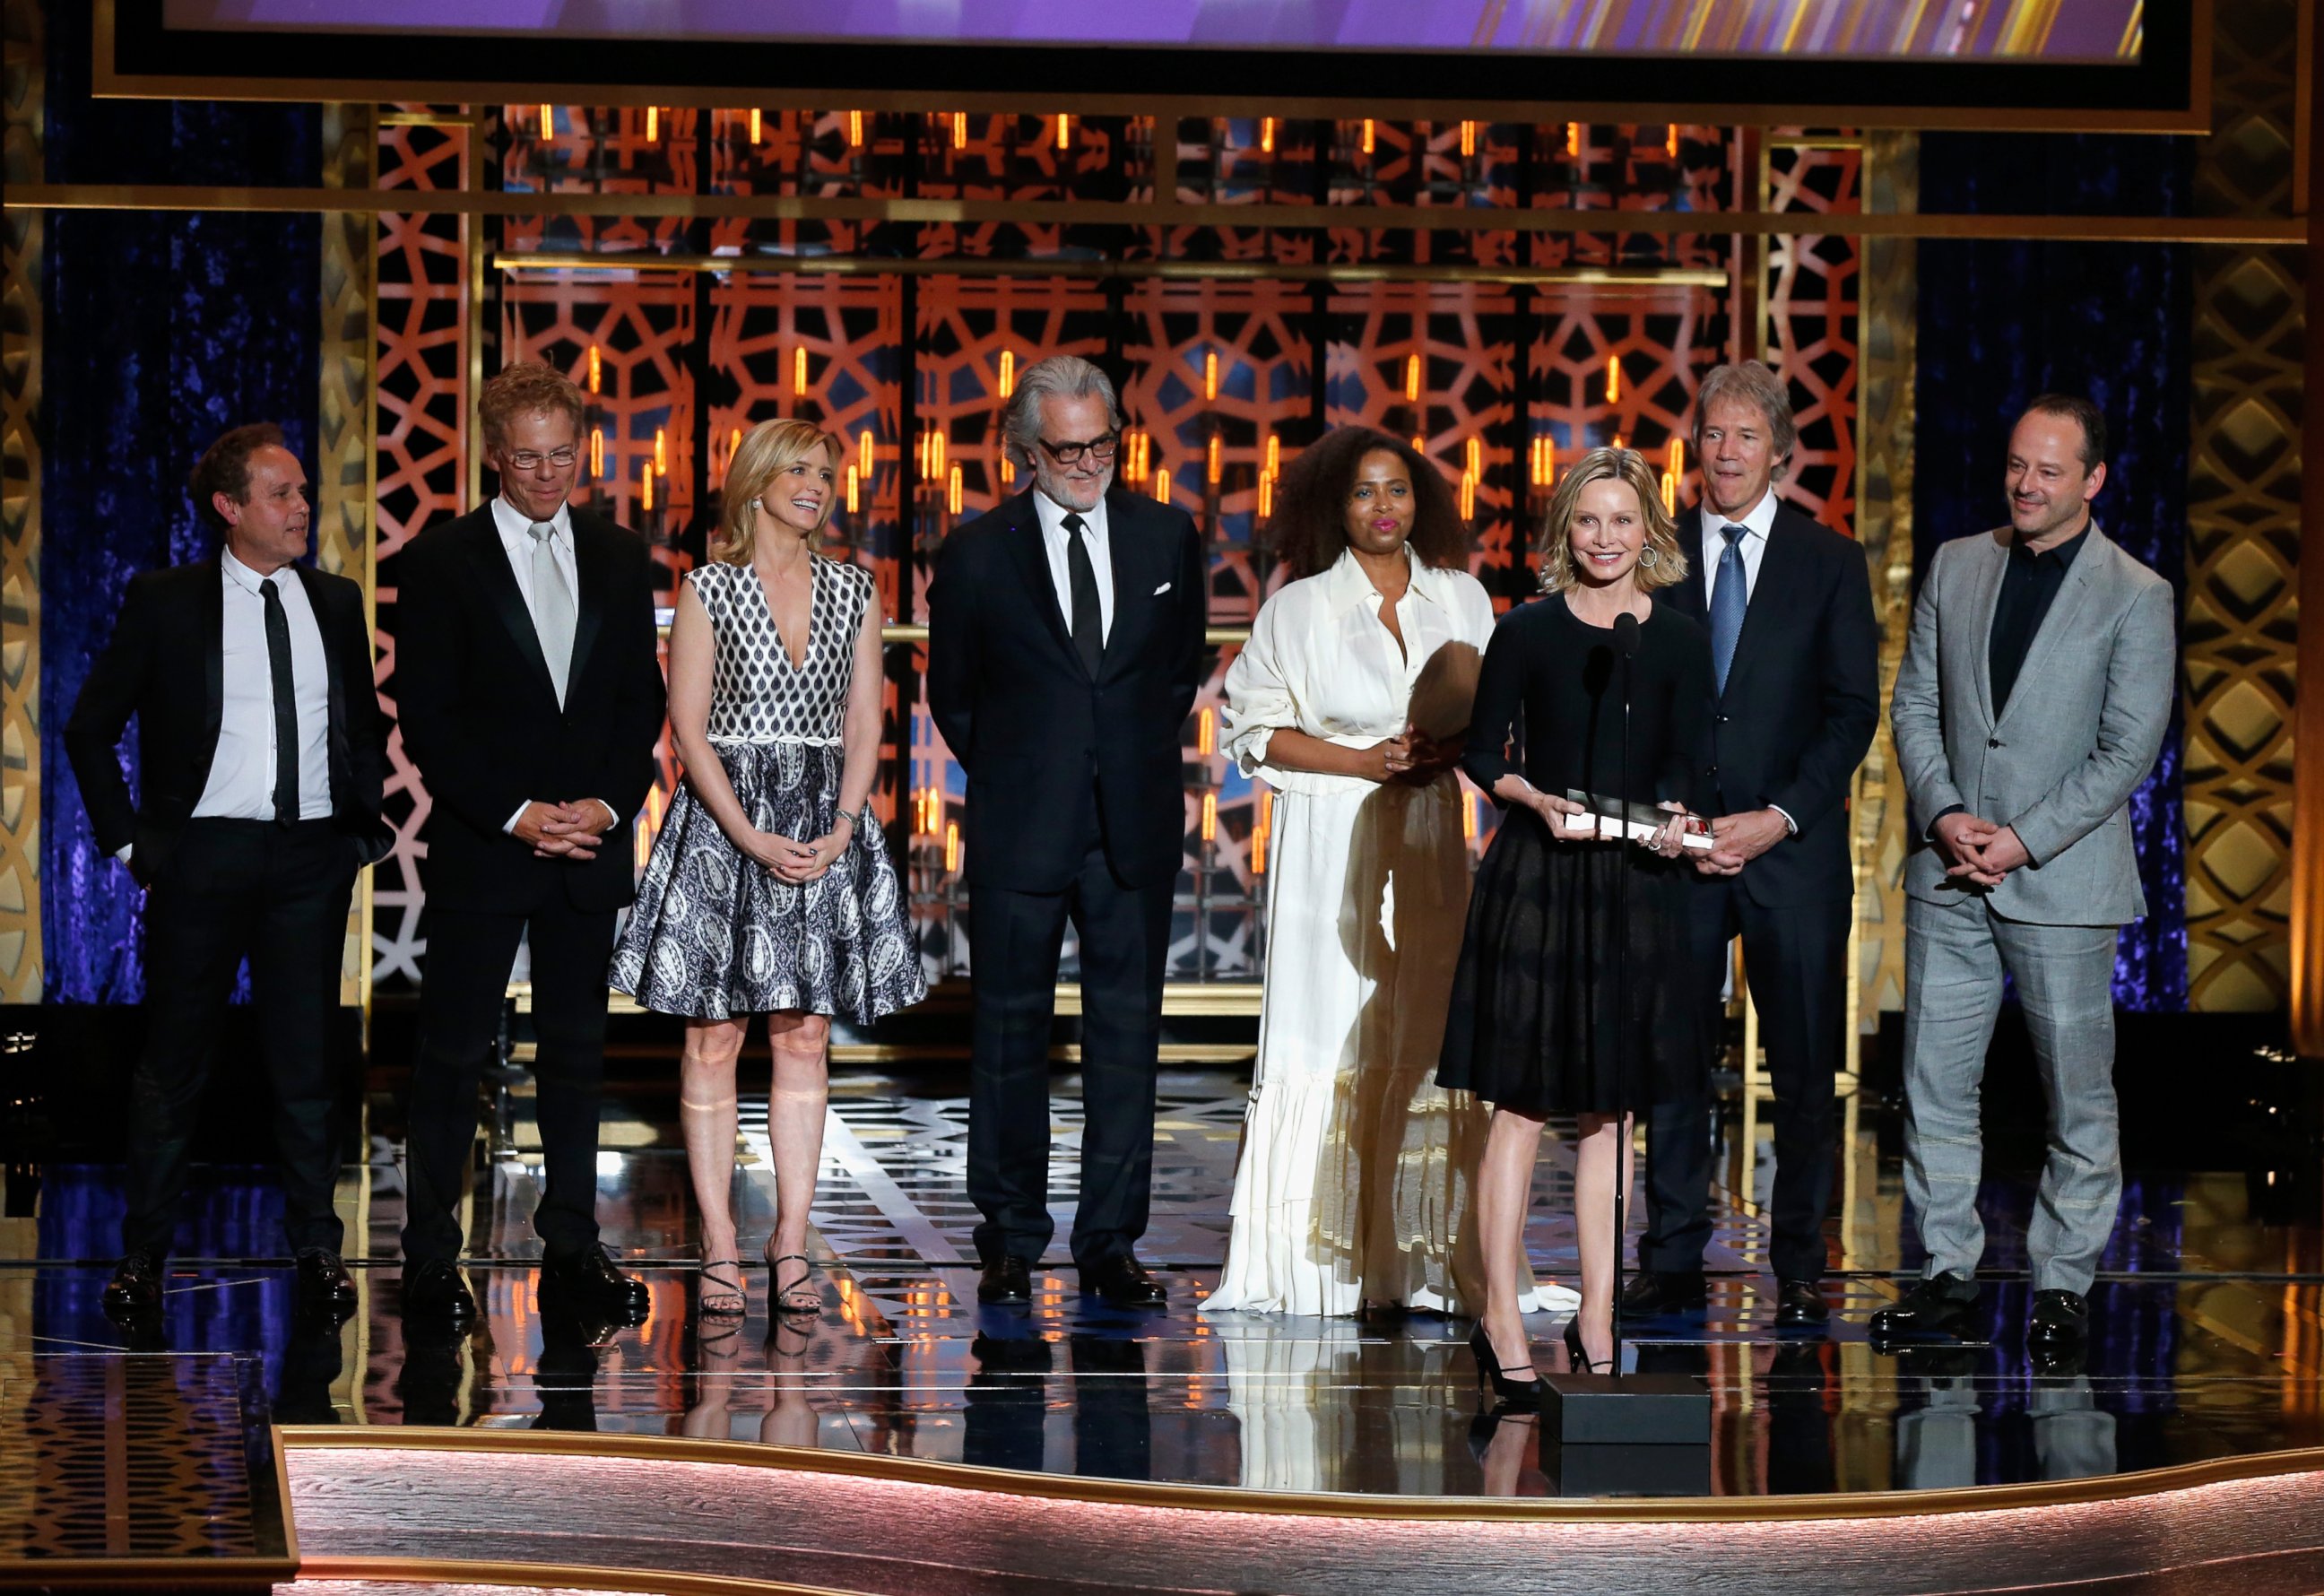 PHOTO: Peter MacNicol, Greg Germann, Courtney Thorne-Smith, Bill D'Elia, Lisa Nicole Carson, Calista Flockhart, David E. Kelley and Gil Bellows accept an award for "?Ally McBeal"? during the 2015 TV Land Awards on April 11, 2015, in Beverly Hills, Calif.